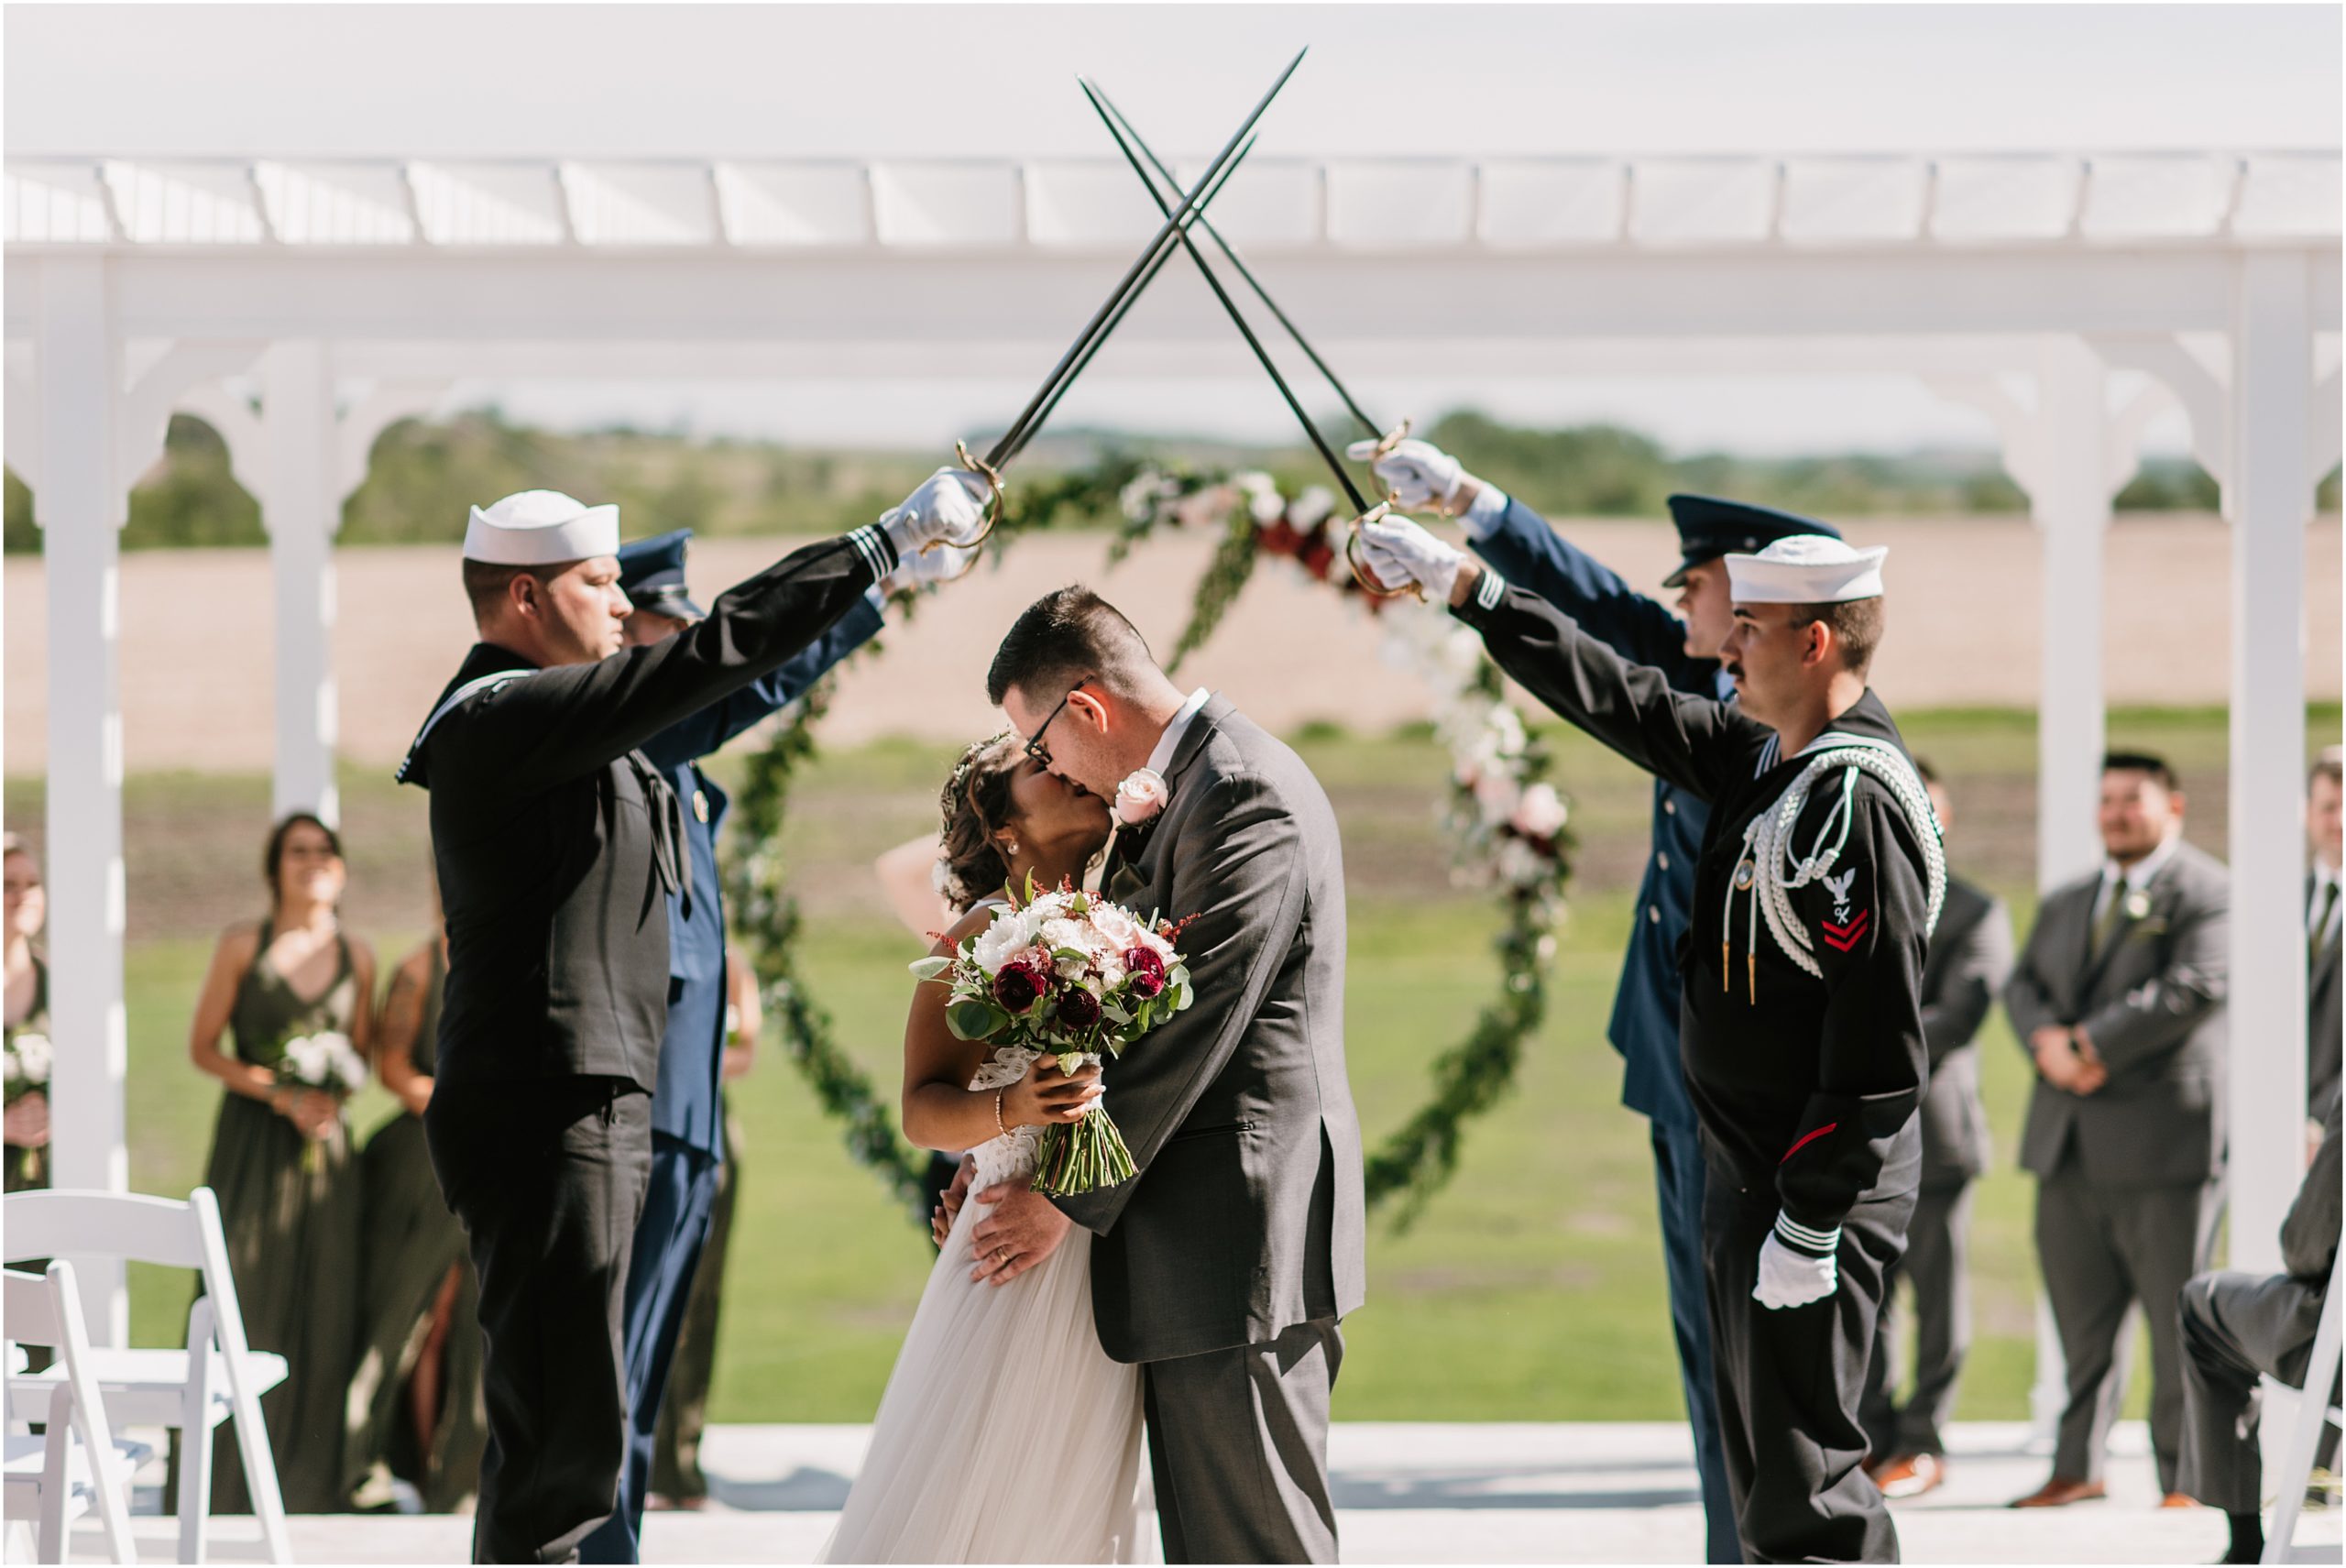 Bride and Groom kiss underneath and arch of swords outside at The Palace Event Center by Omaha Nebraska Photographer Anna Brace